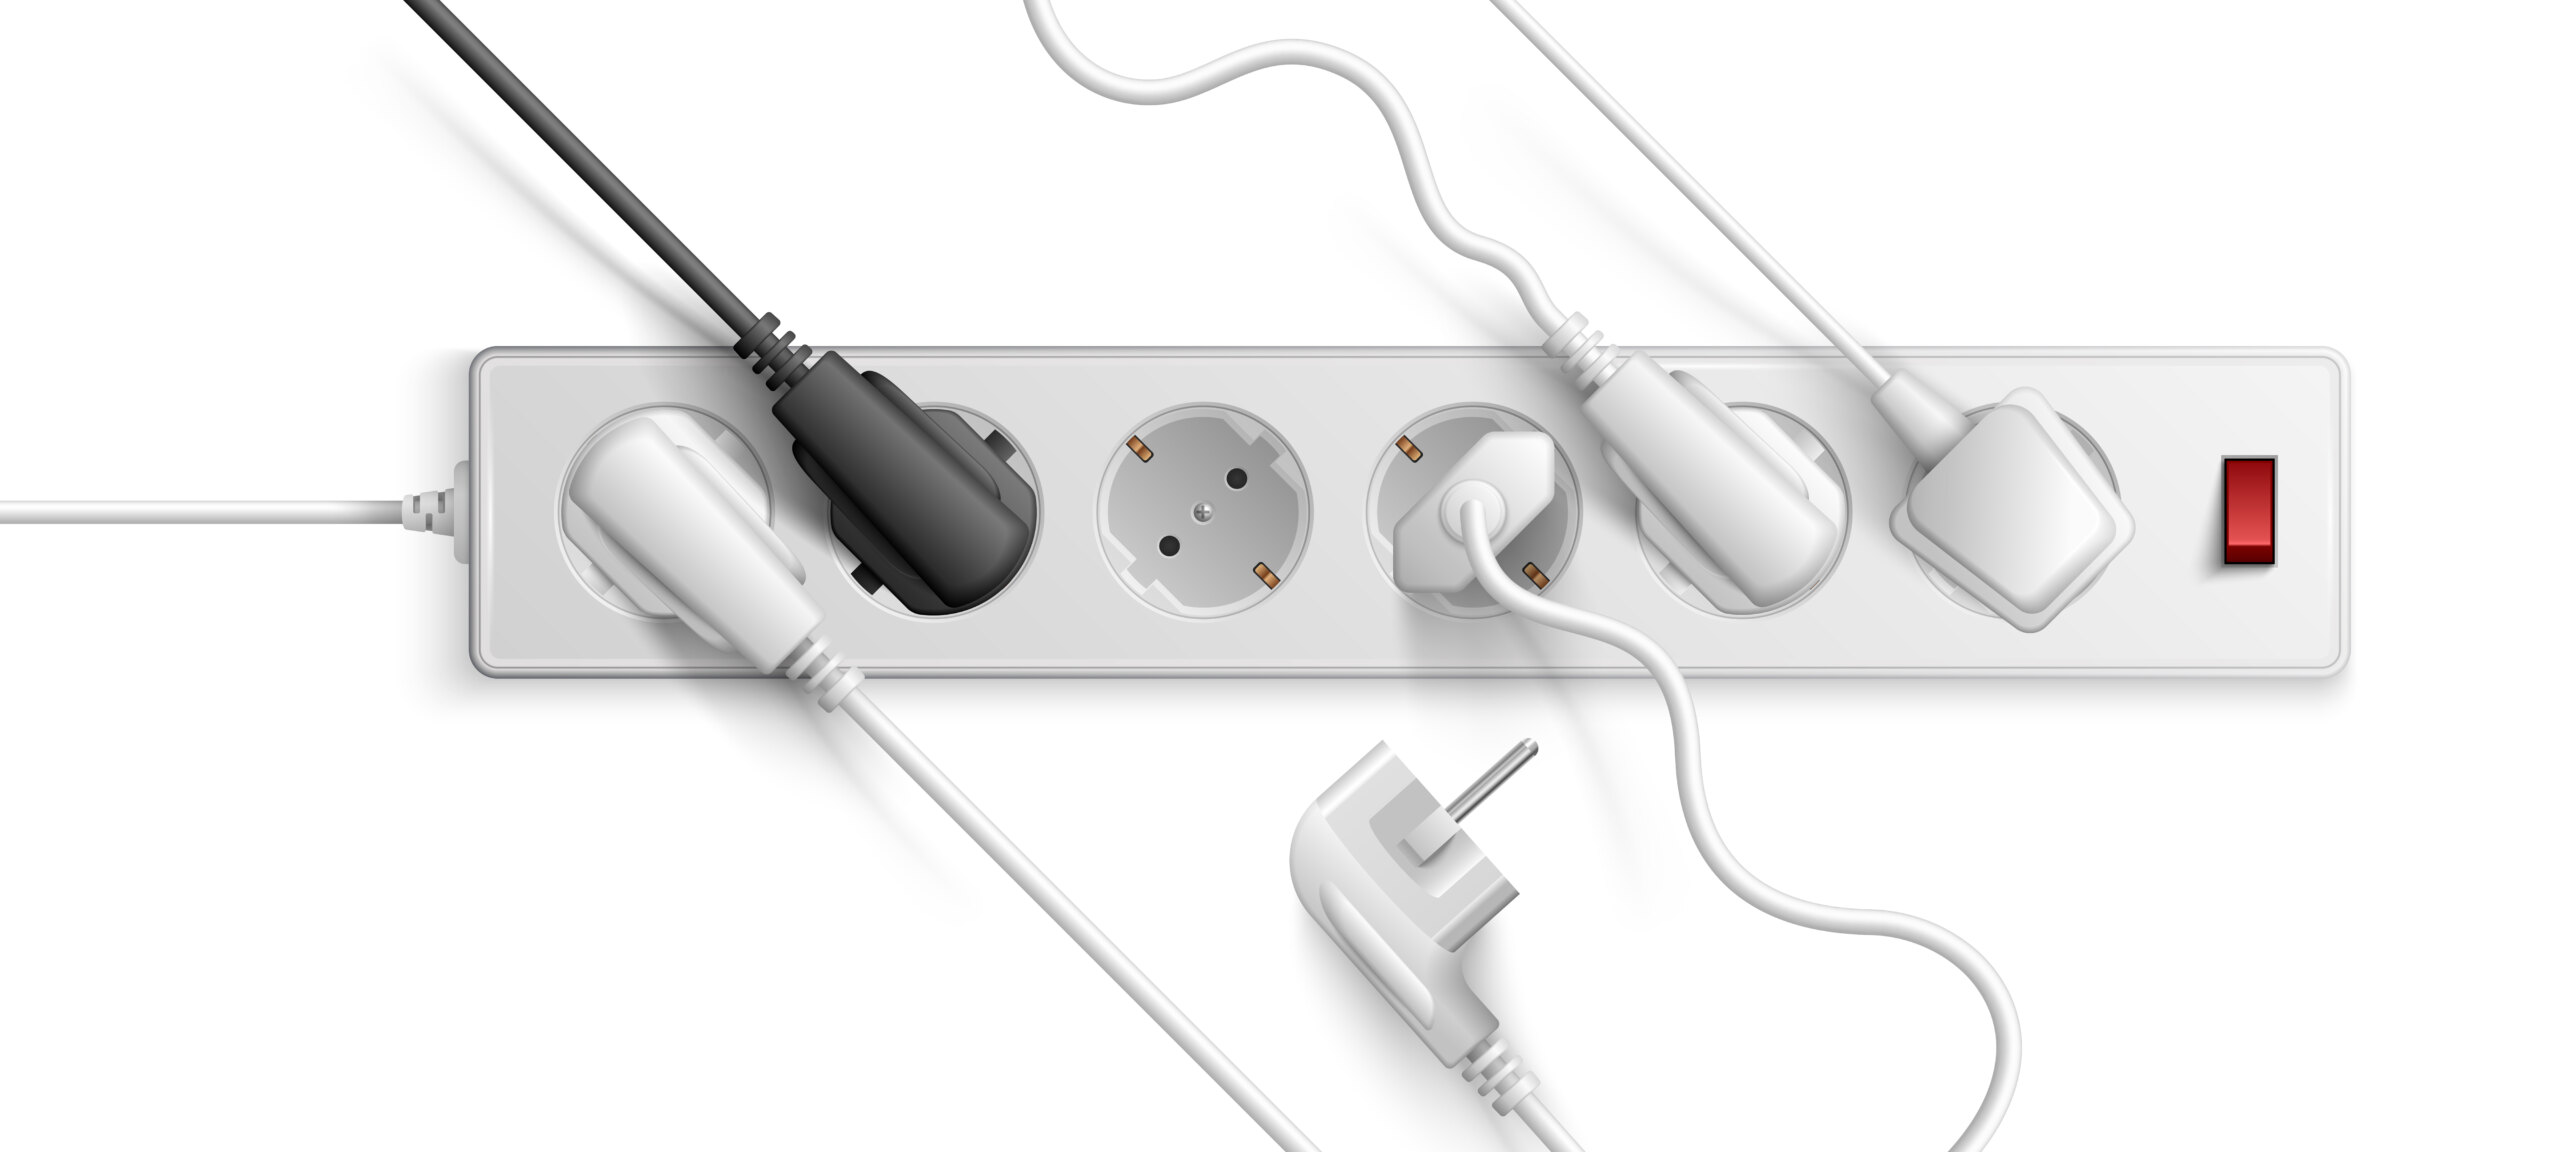 An illustration of extension cord